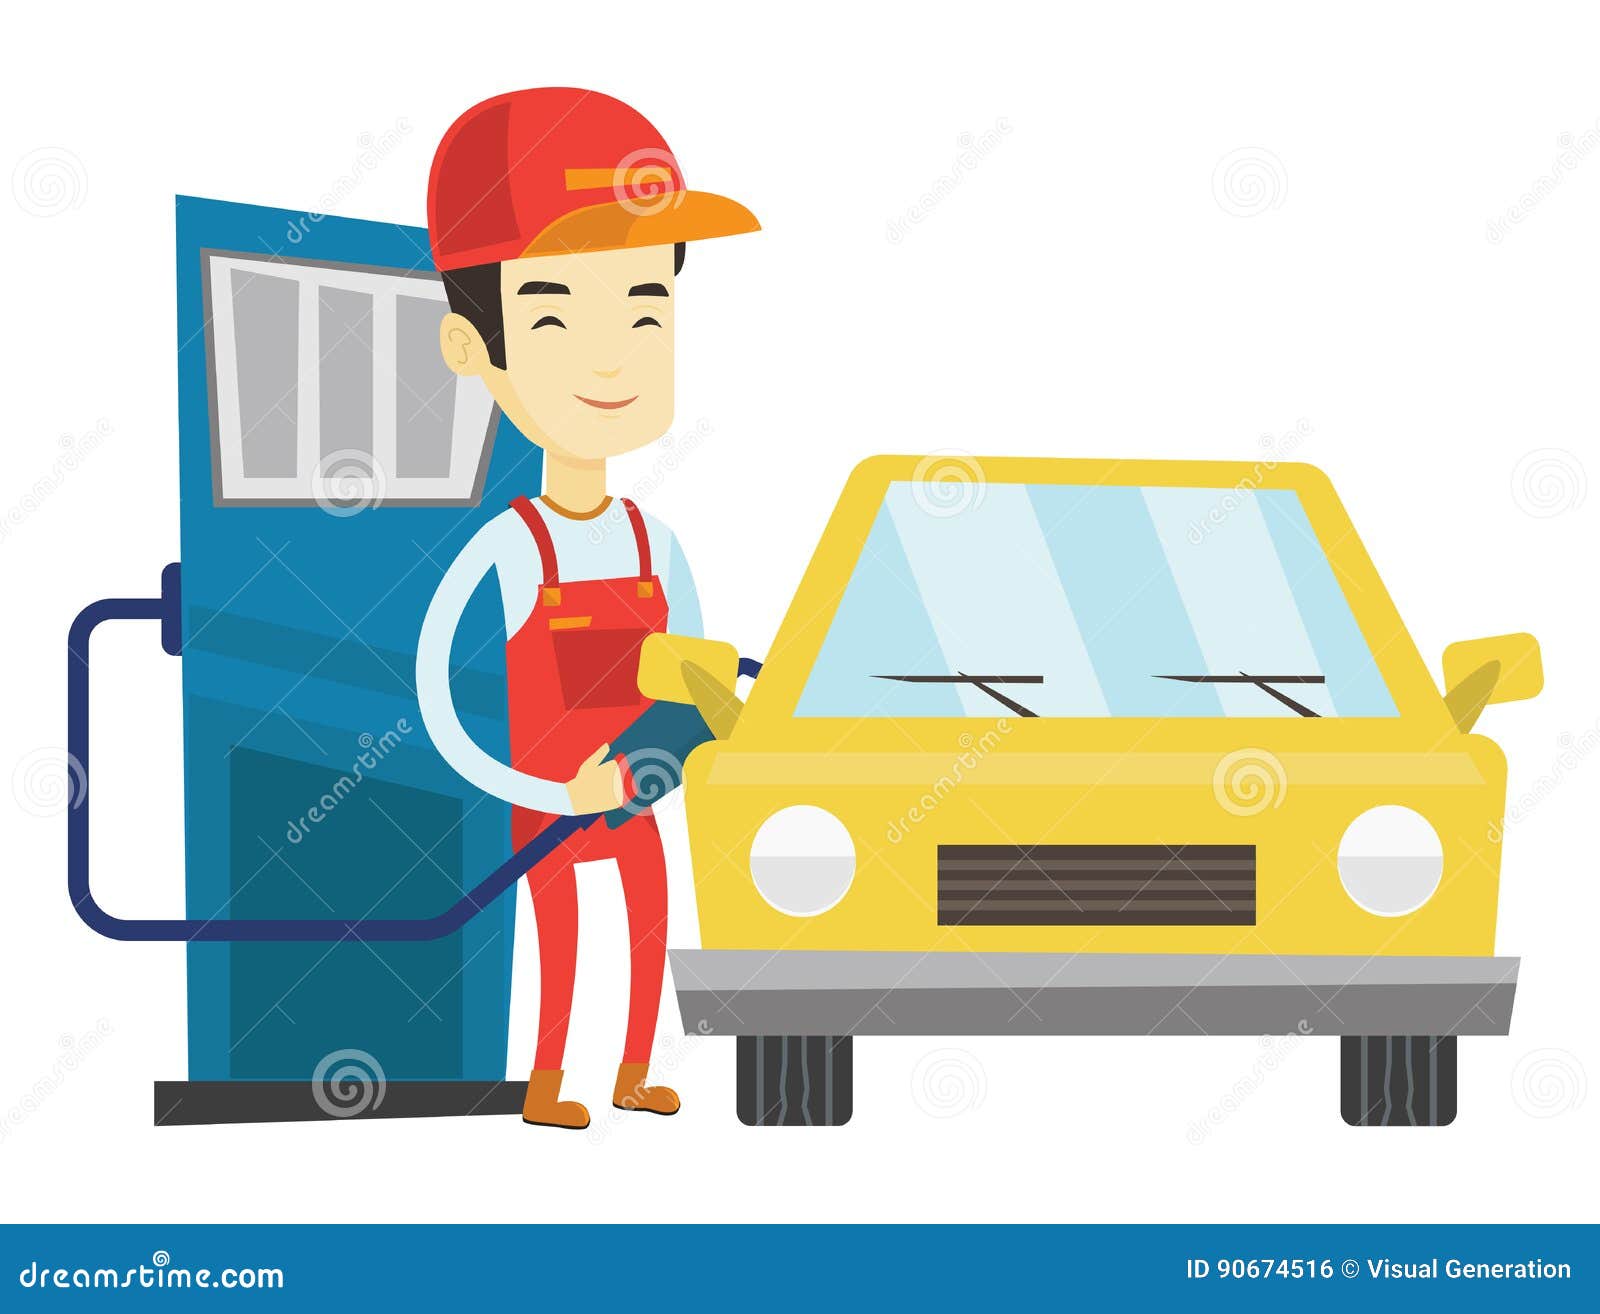 worker filling up fuel car gas station asian smiling workwear young refueling 90674516